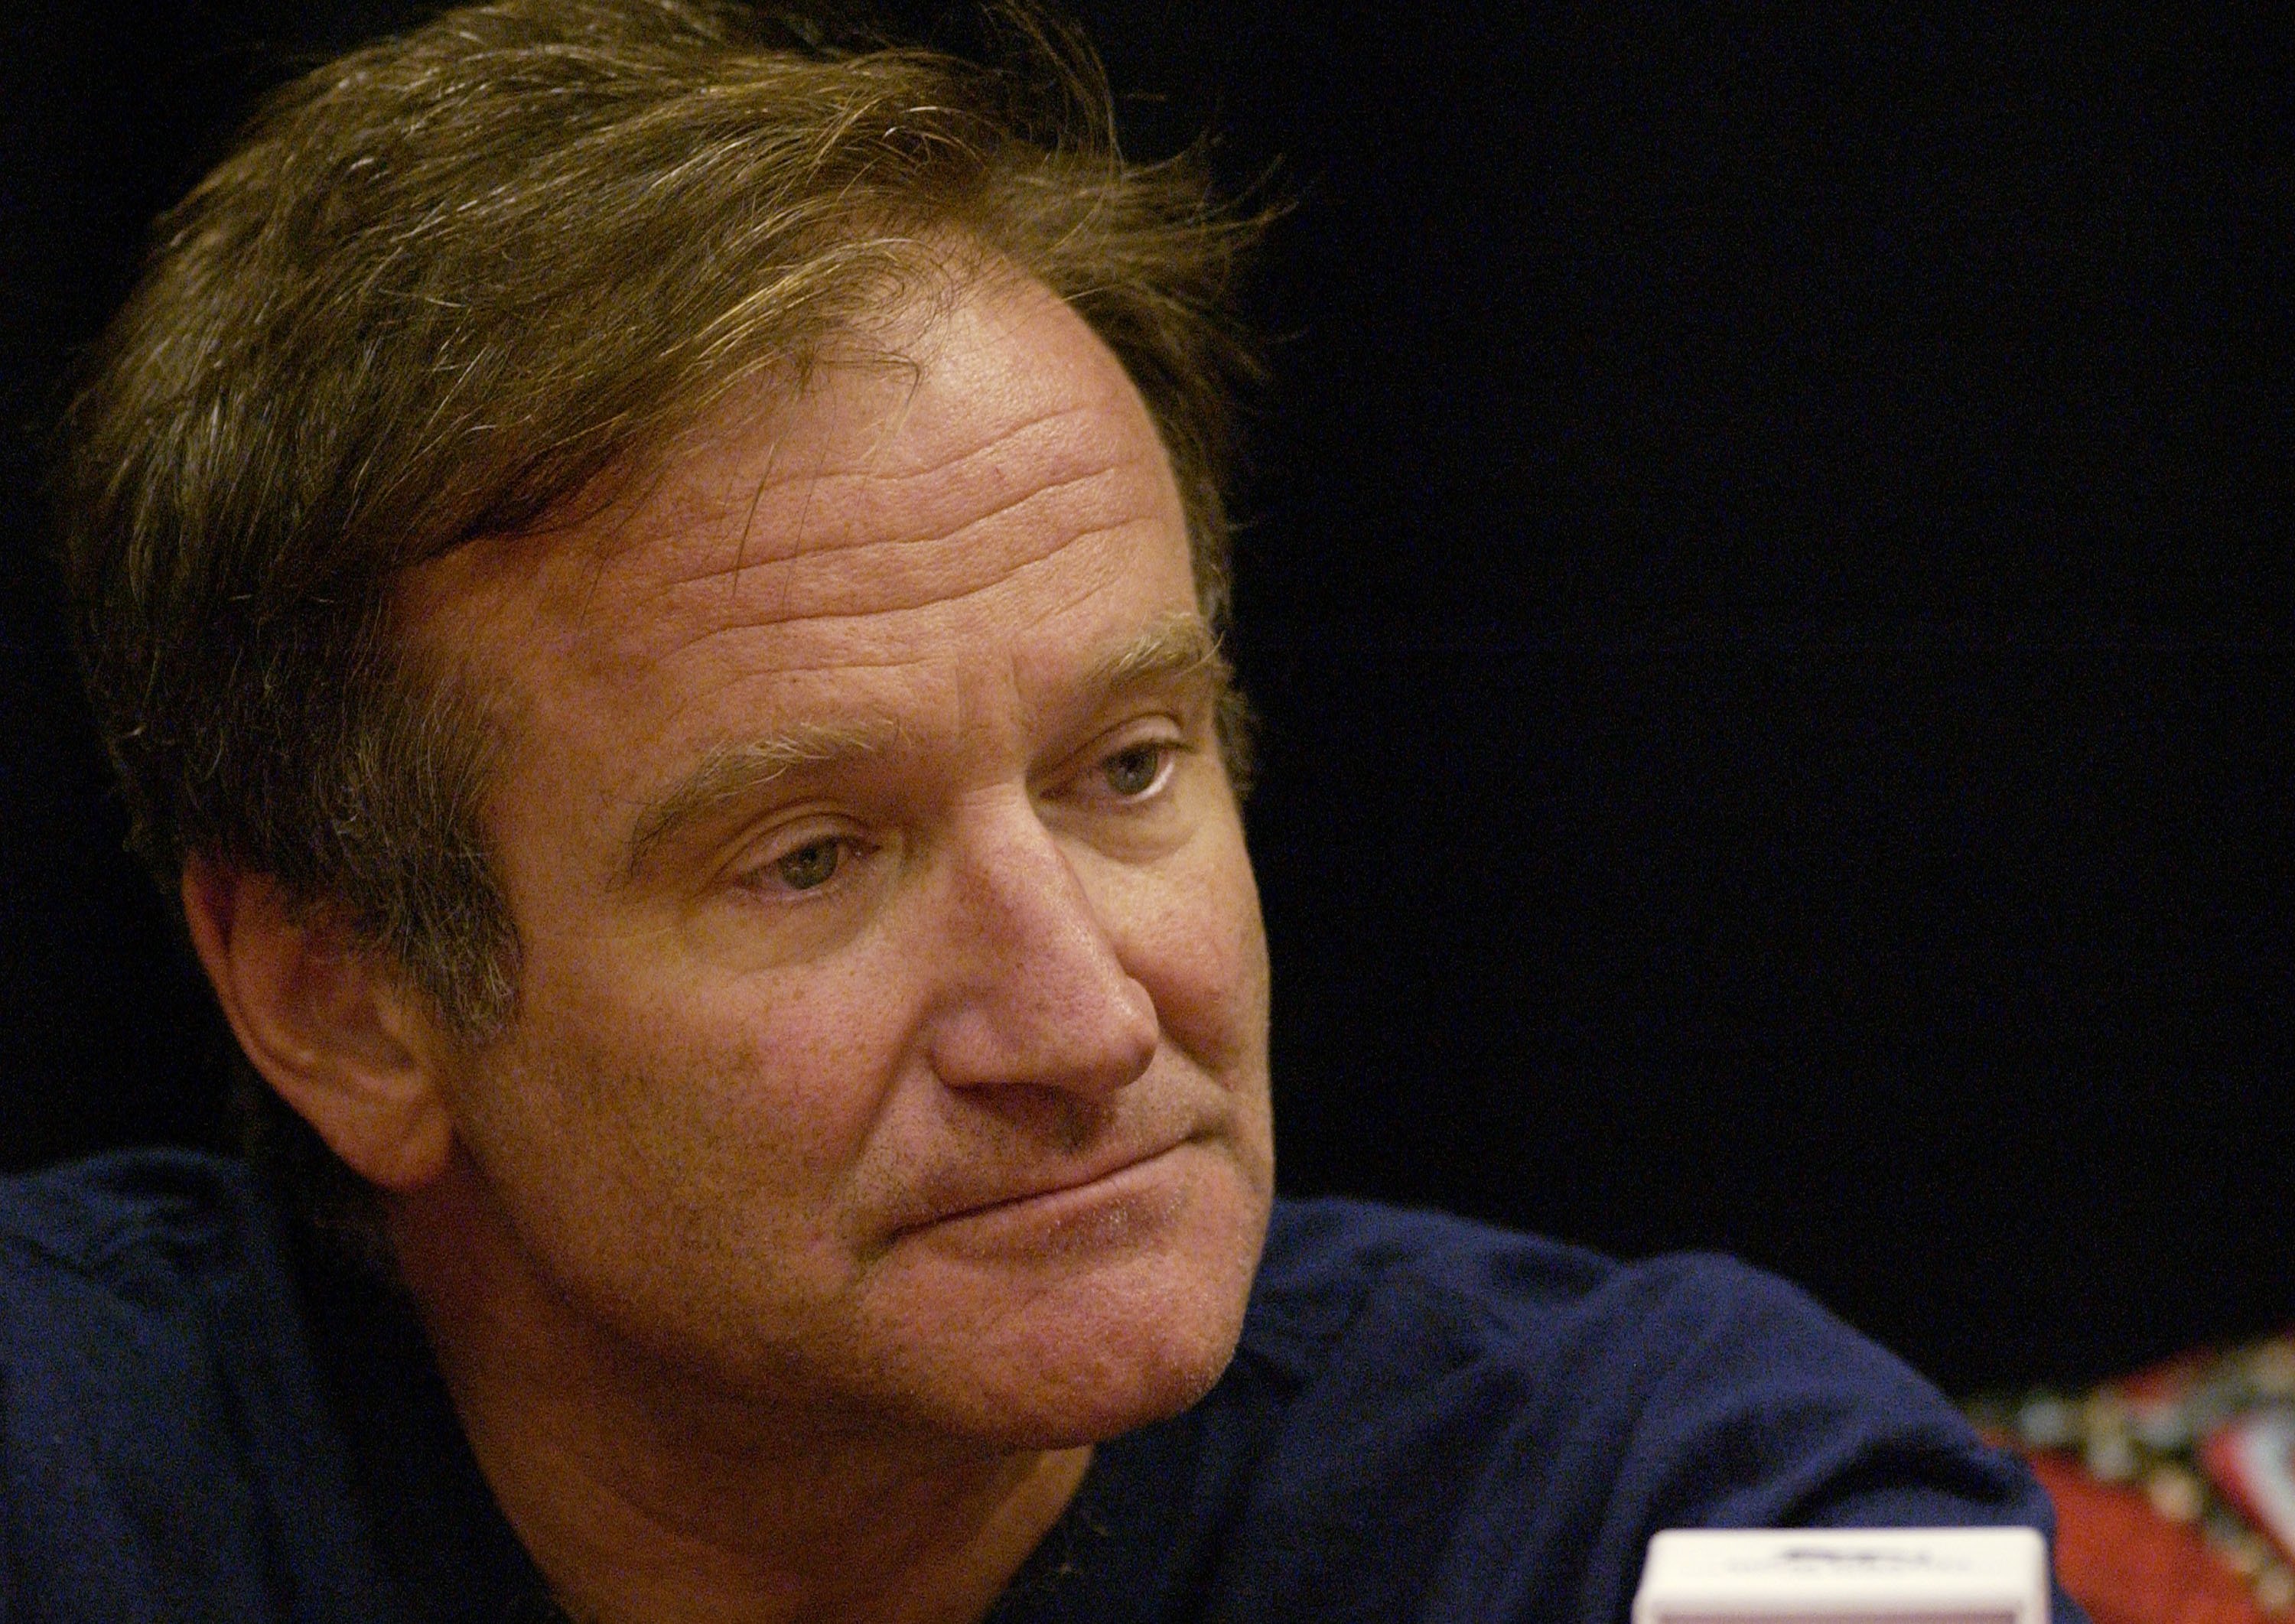 Robin Williams during Seventh Annual Andre Agassi Charitable Foundation's Grand Slam for Kids at MGM Grand Hotel in Las Vegas, Nevada | Source: Getty Images